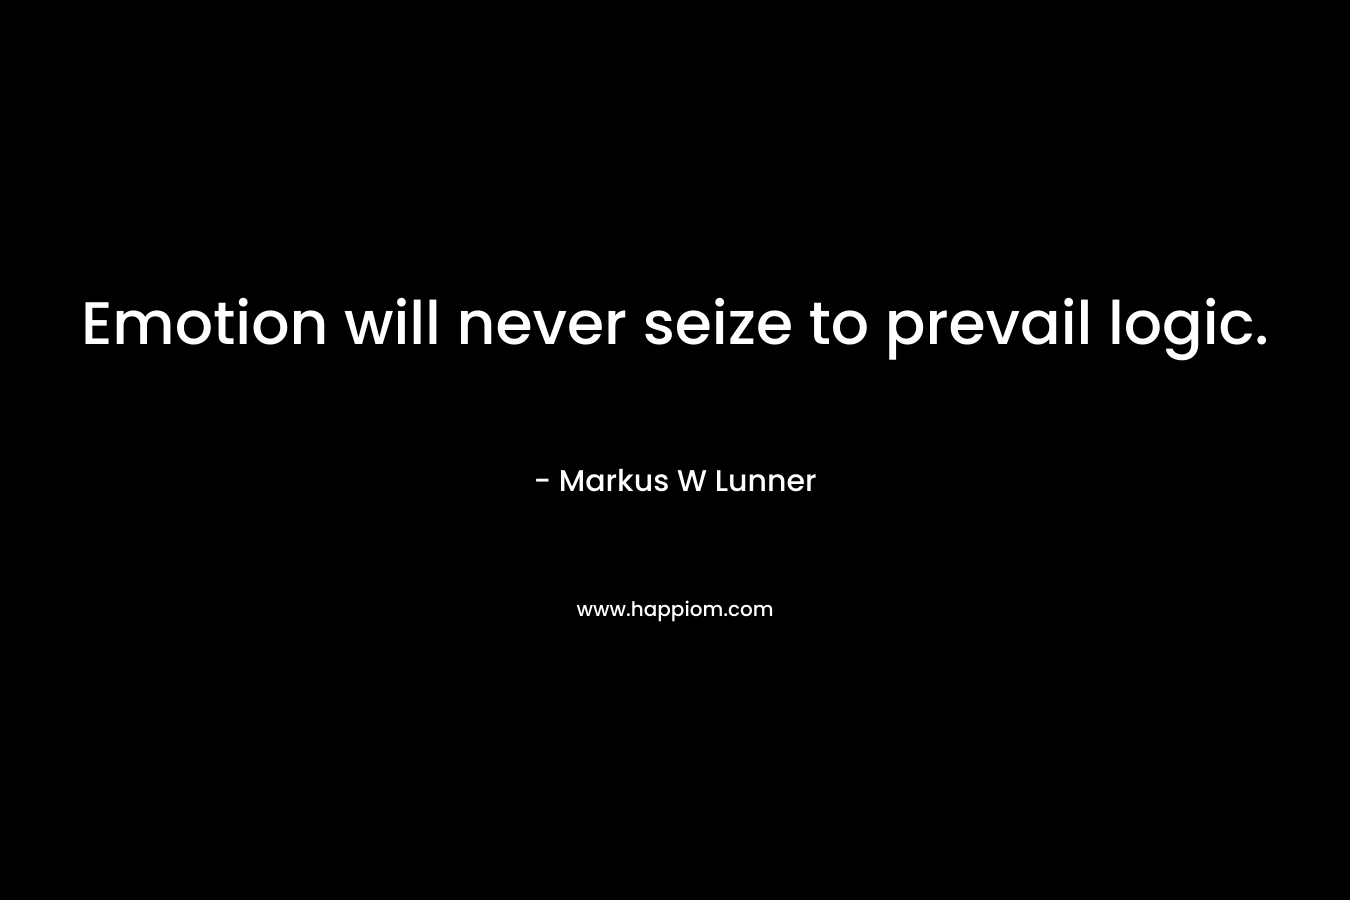 Emotion will never seize to prevail logic. – Markus W Lunner